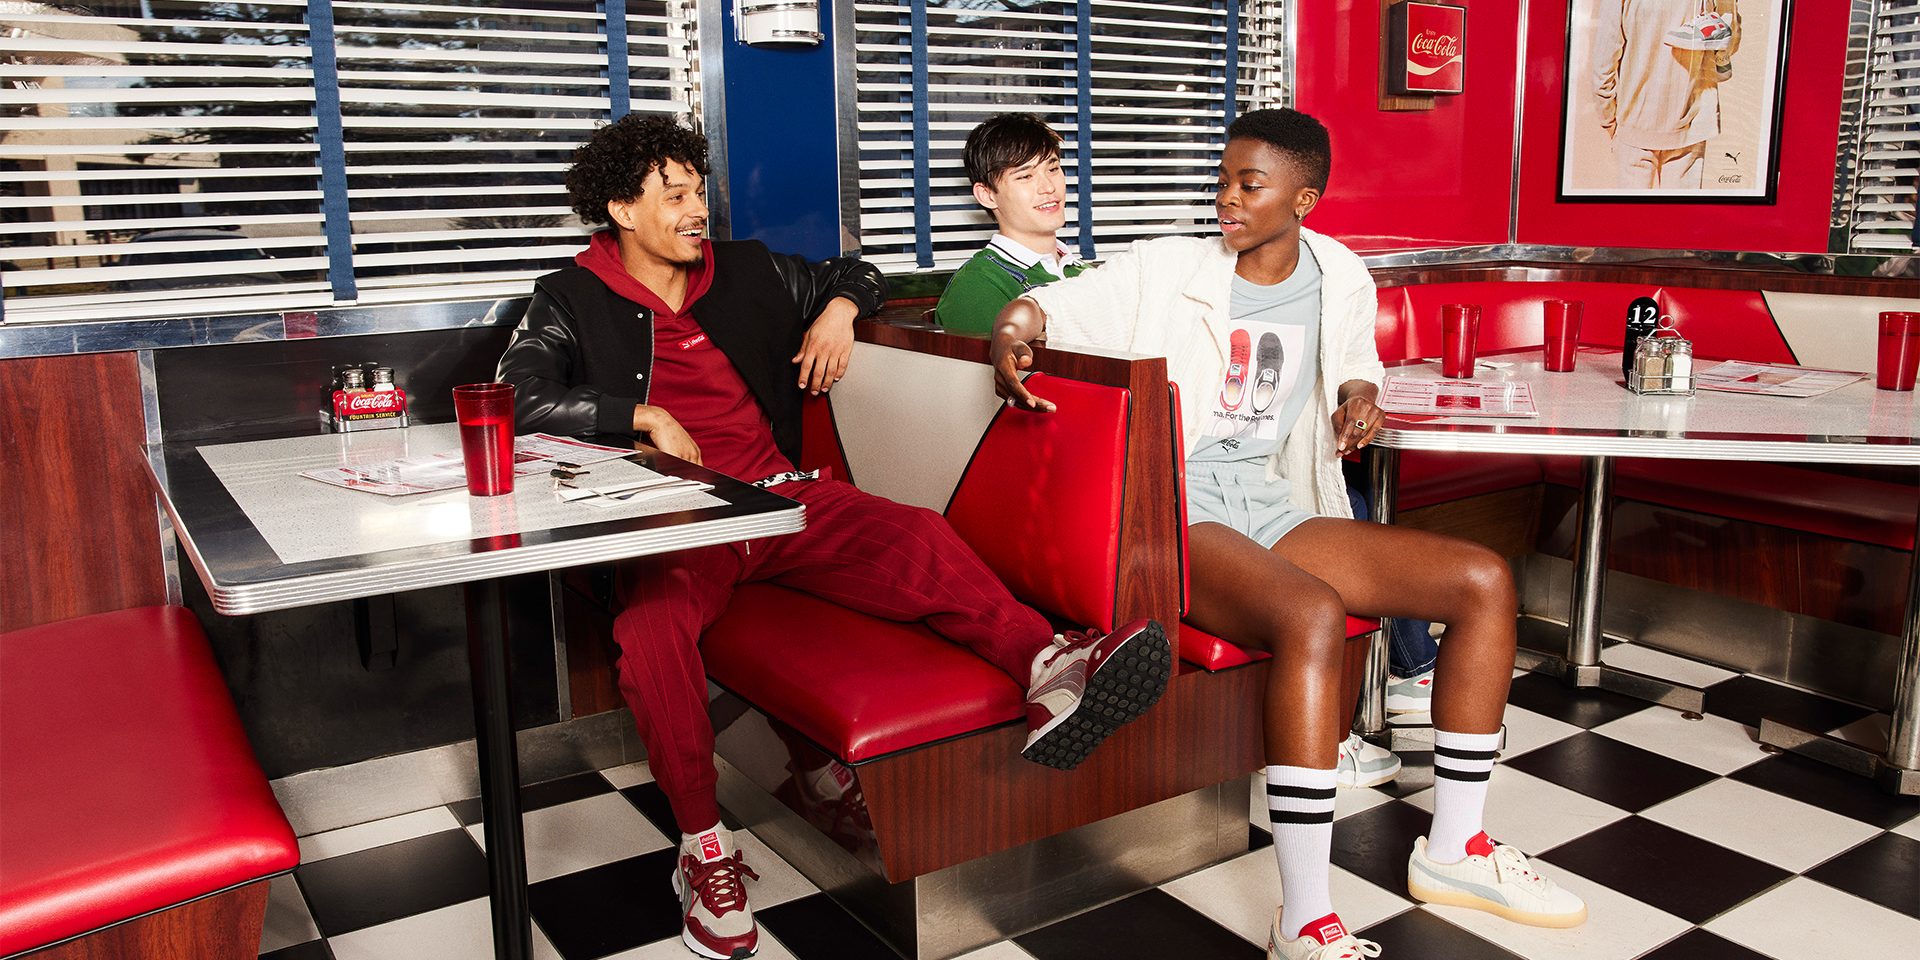 Today's special is Puma X Coca-Cola, a collaboration that is